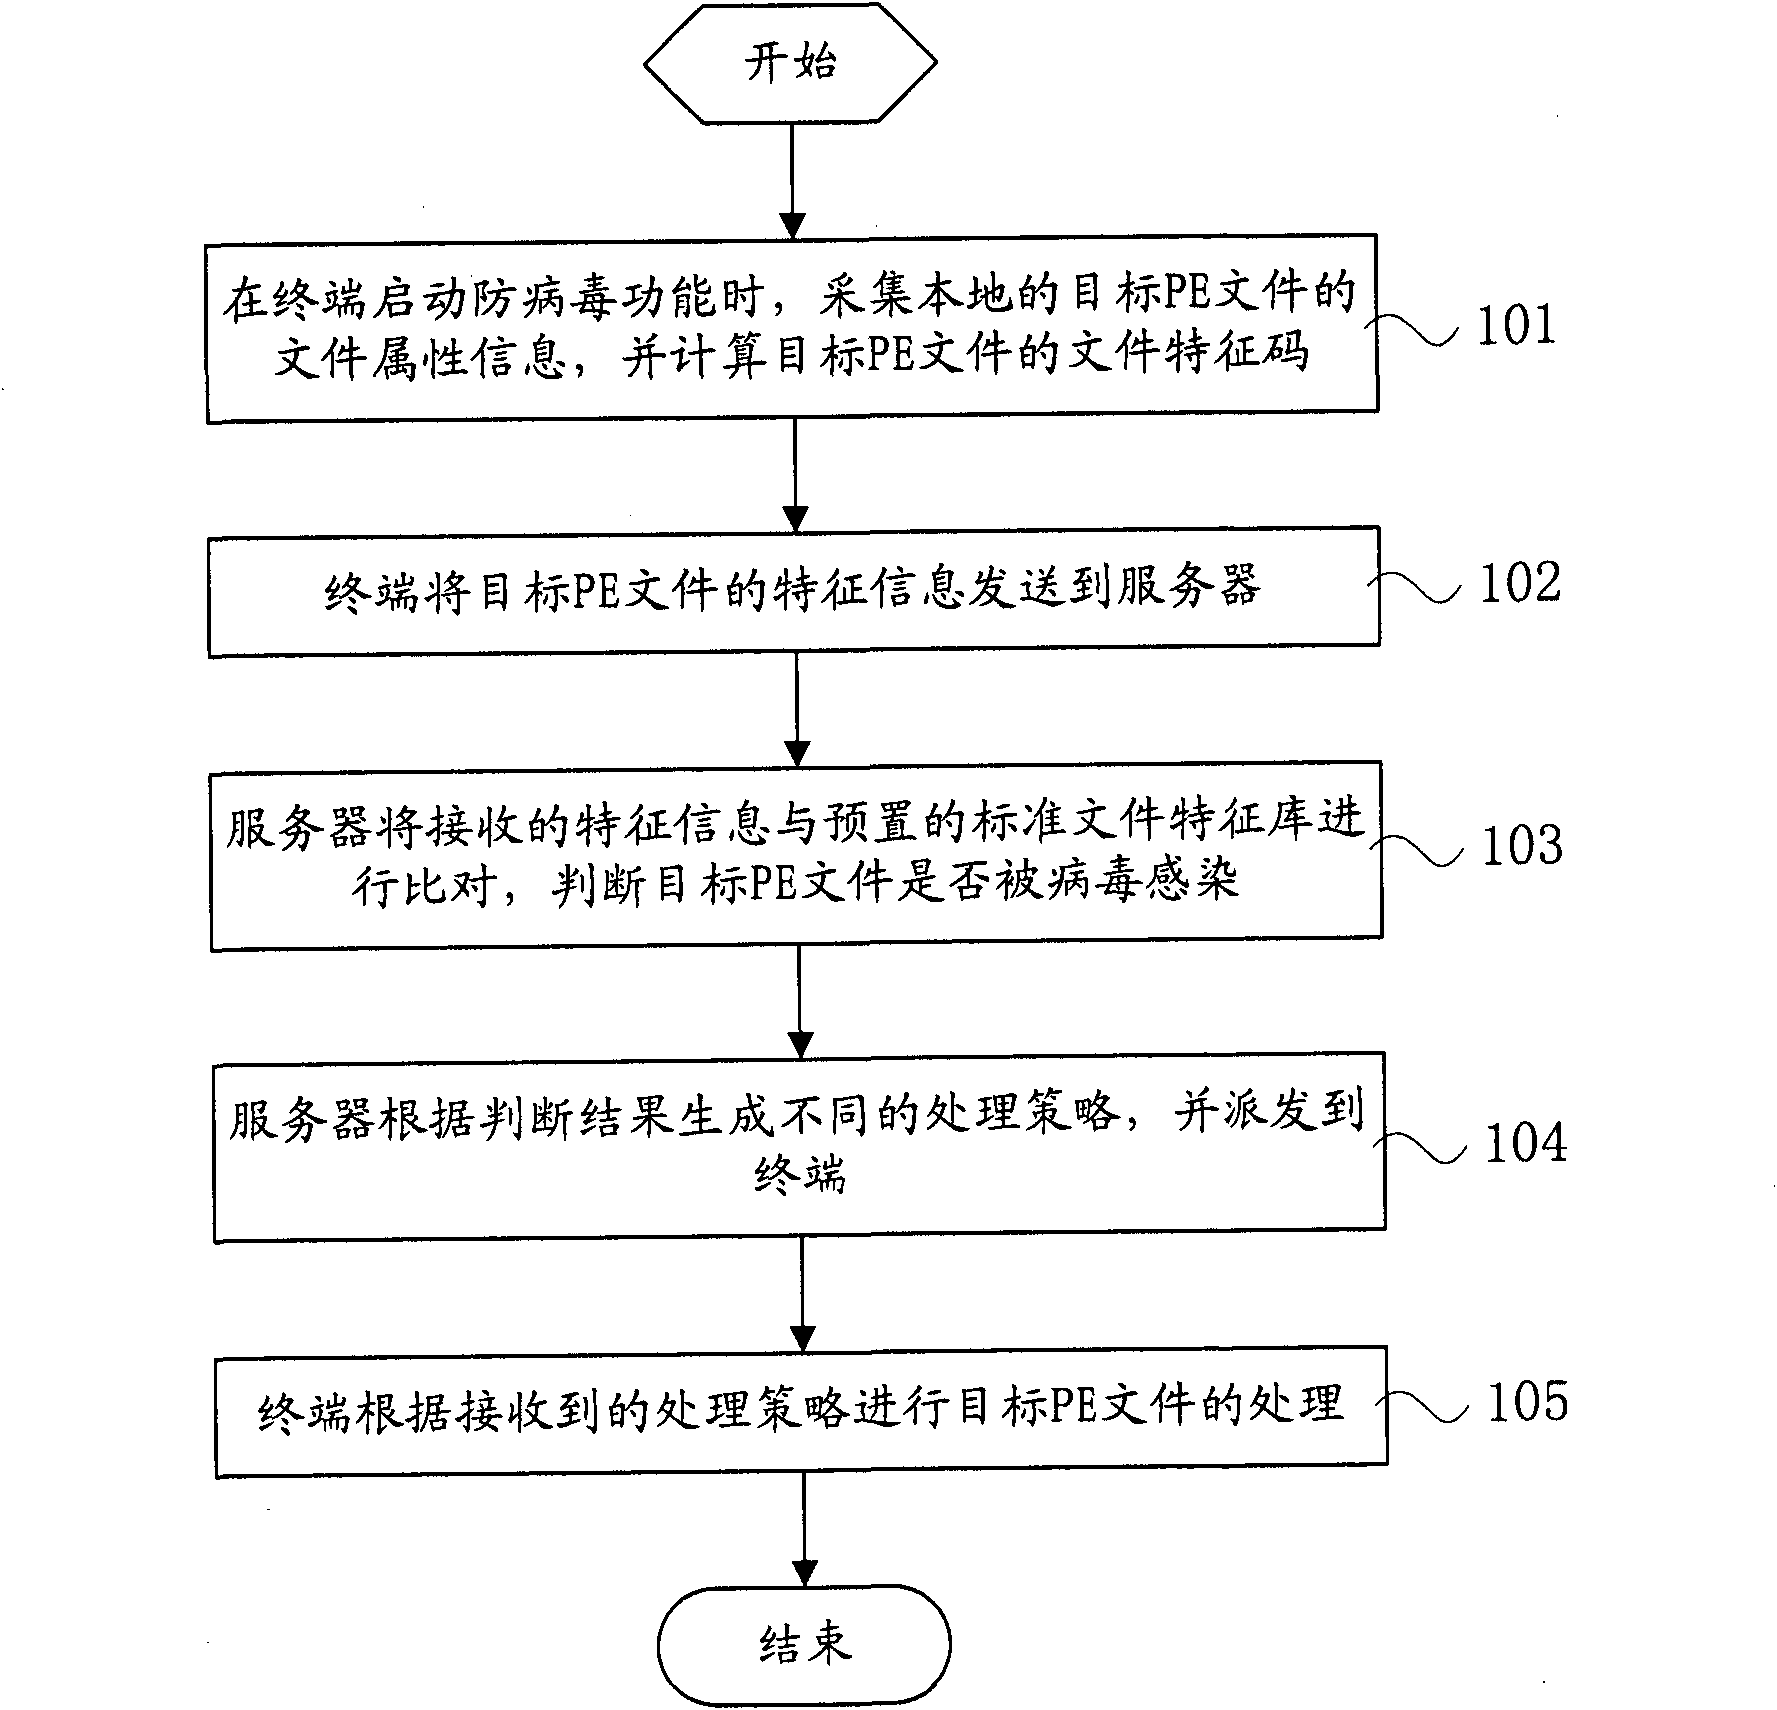 Secure file processing method, equipment and system